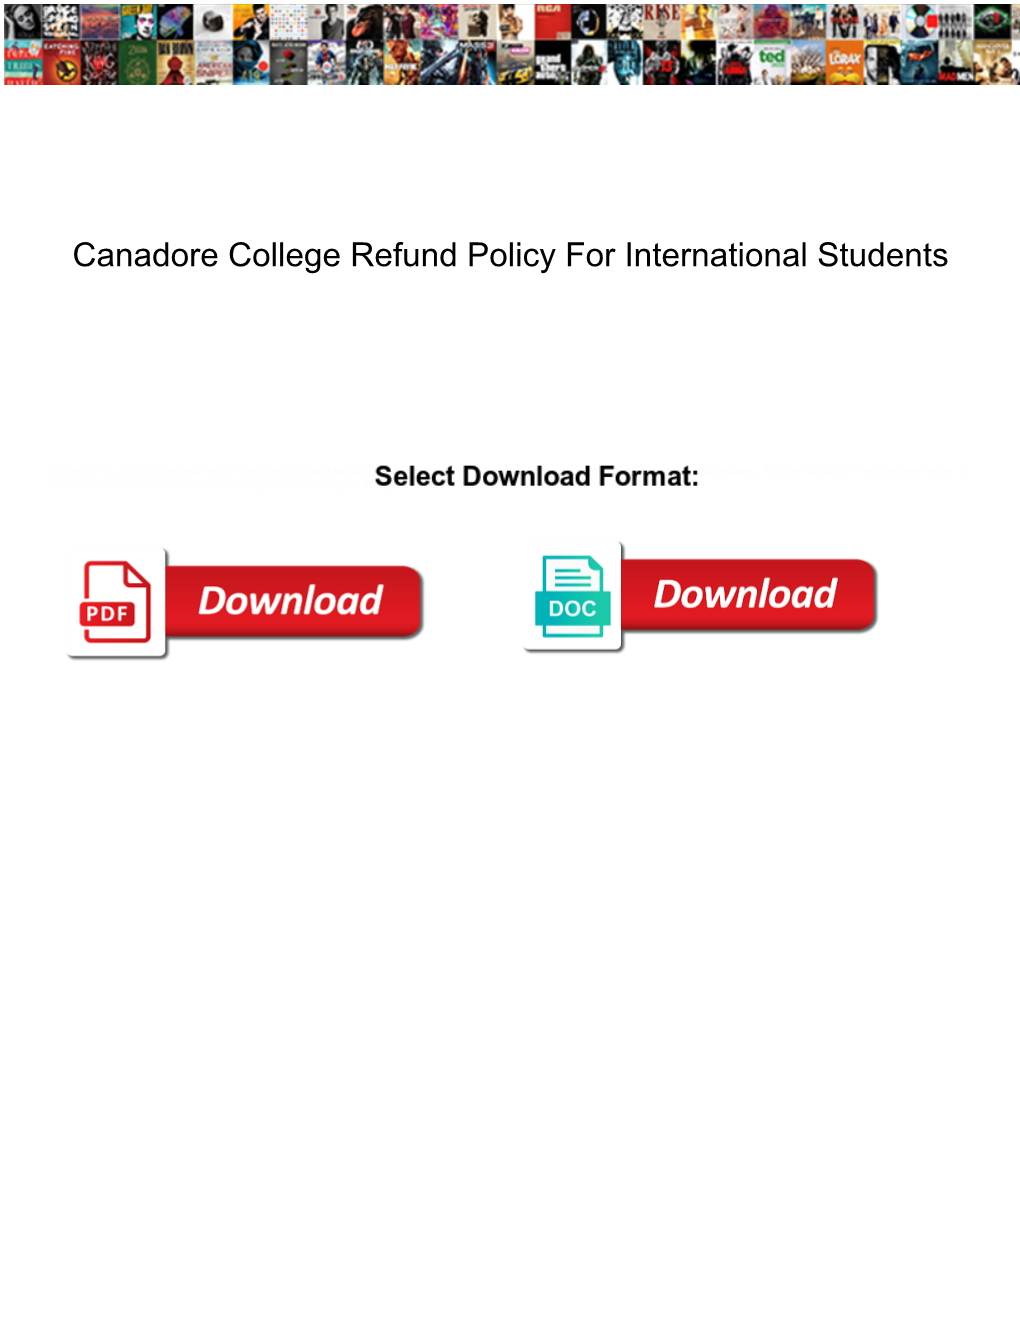 Canadore College Refund Policy for International Students